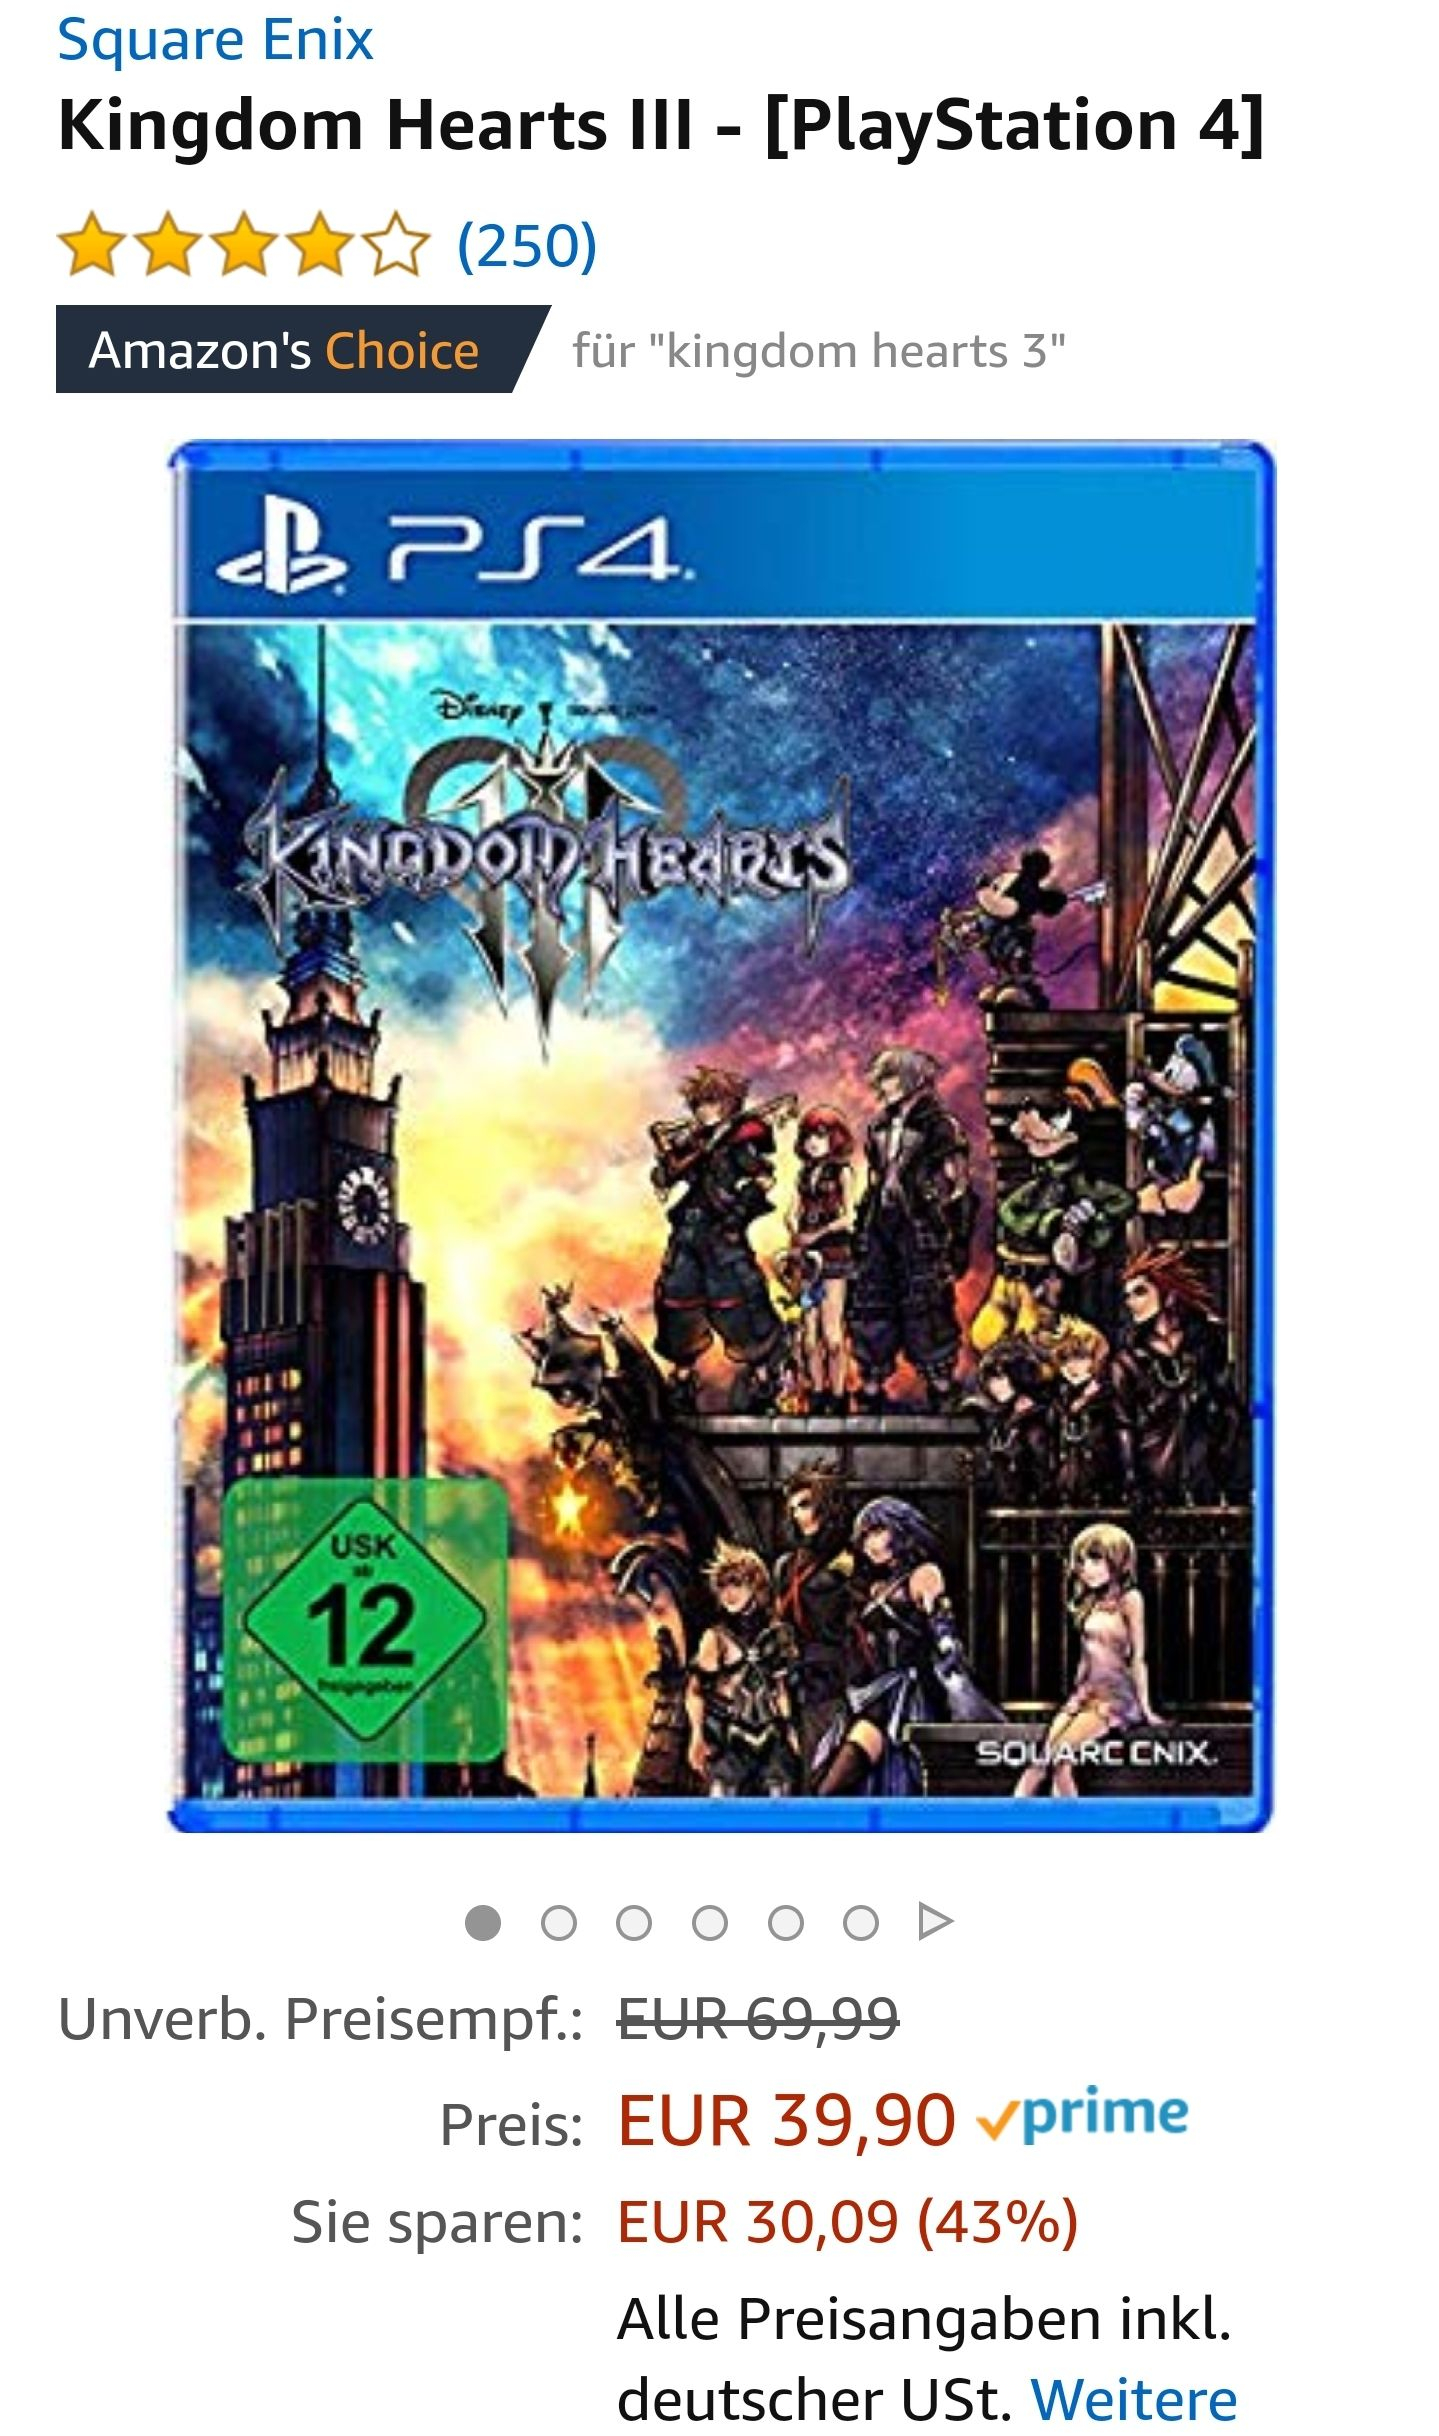 how to get kingdom hearts 3 deluxe edition using amazon prime